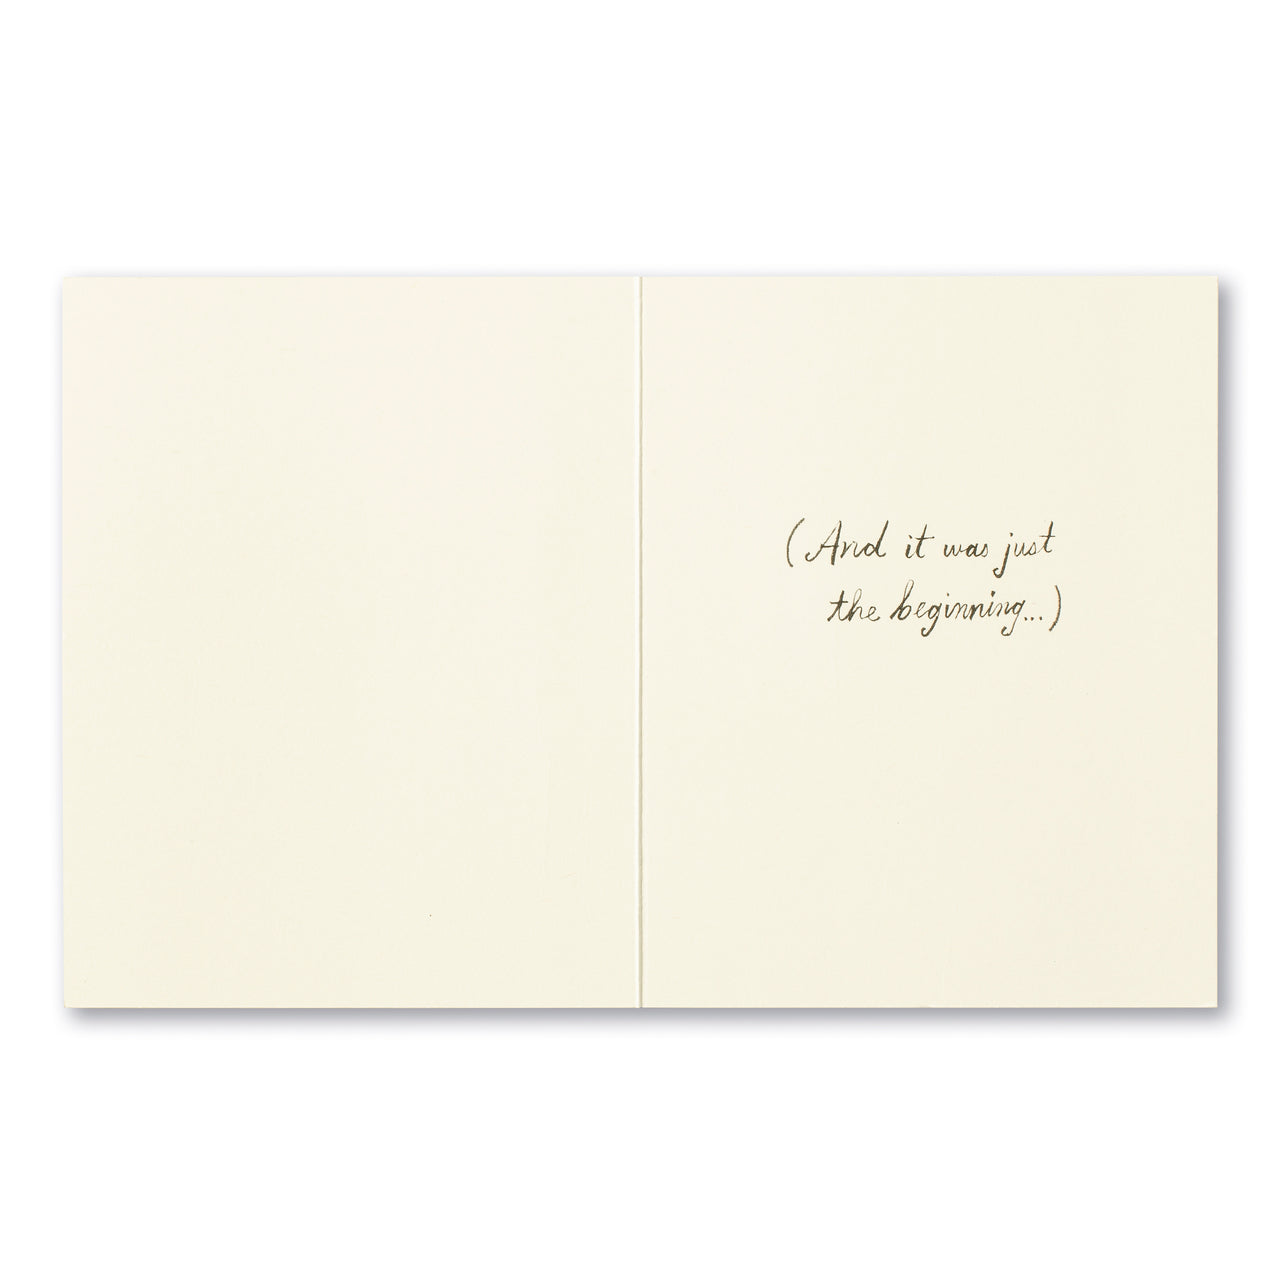 Love Muchly Greeting Card - Wedding - And They Lived Happily Ever After - Mellow Monkey